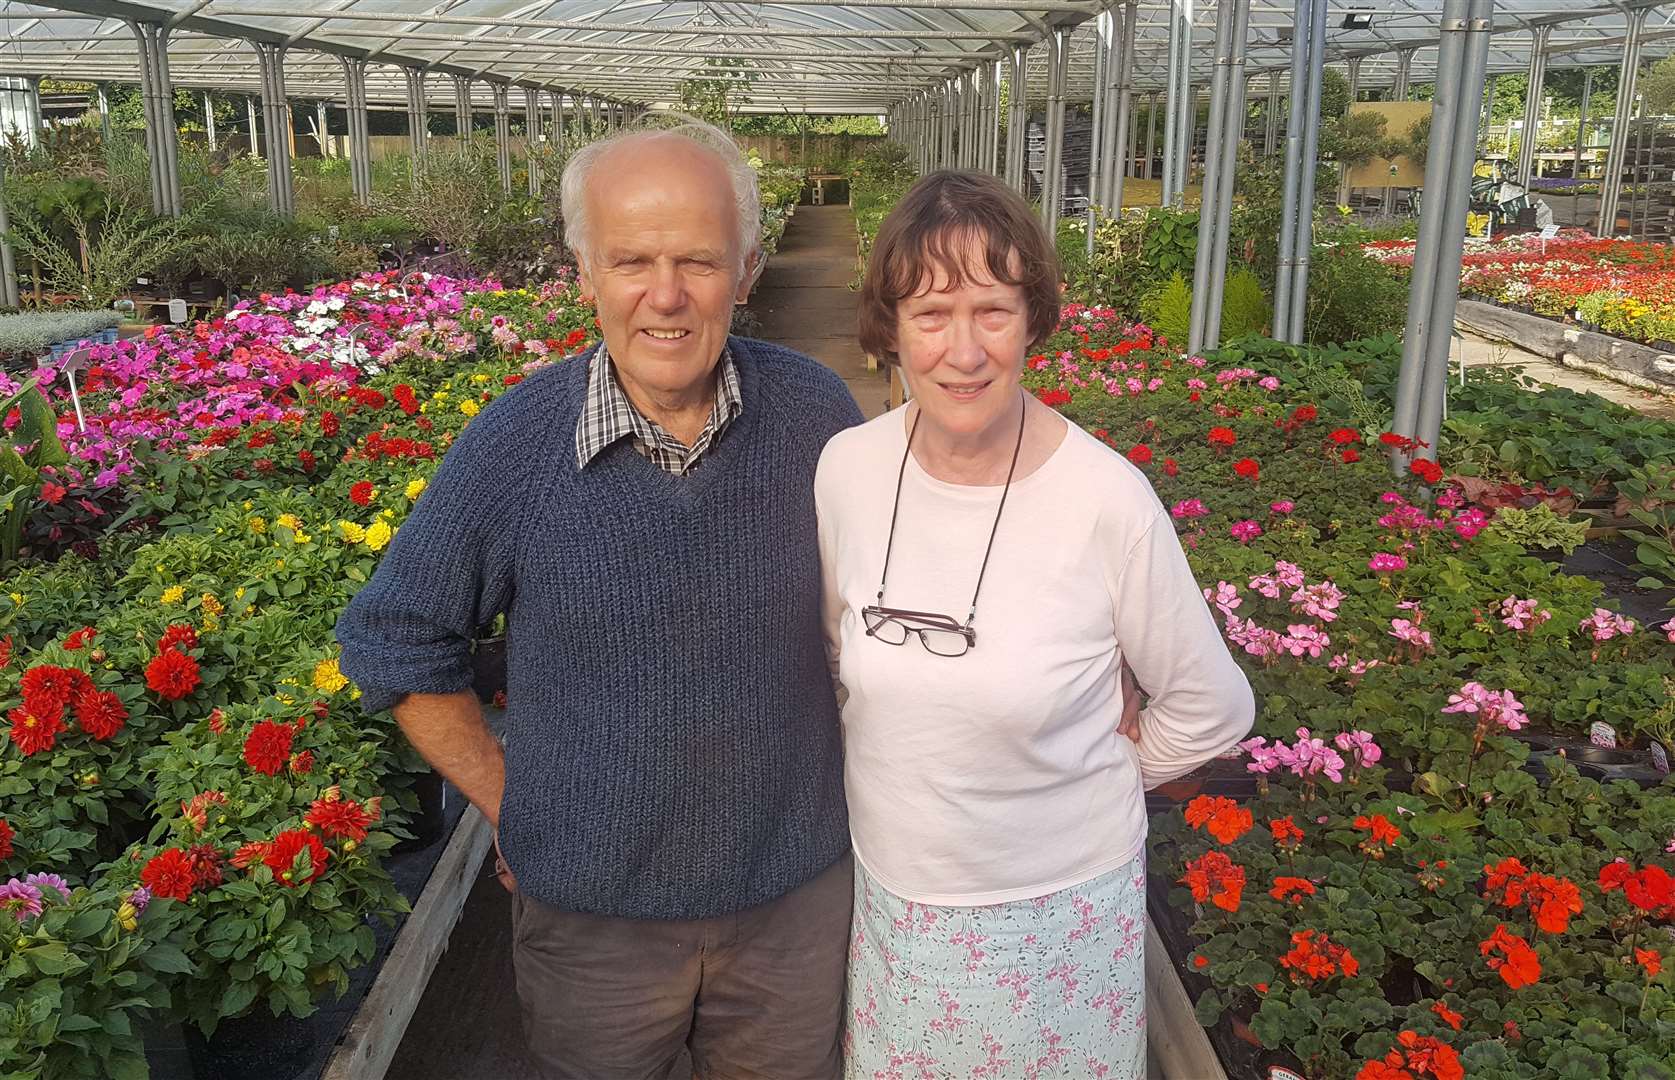 Paul and Jacky Kennett are retiring from the Meadow Grange Nursery at Blean